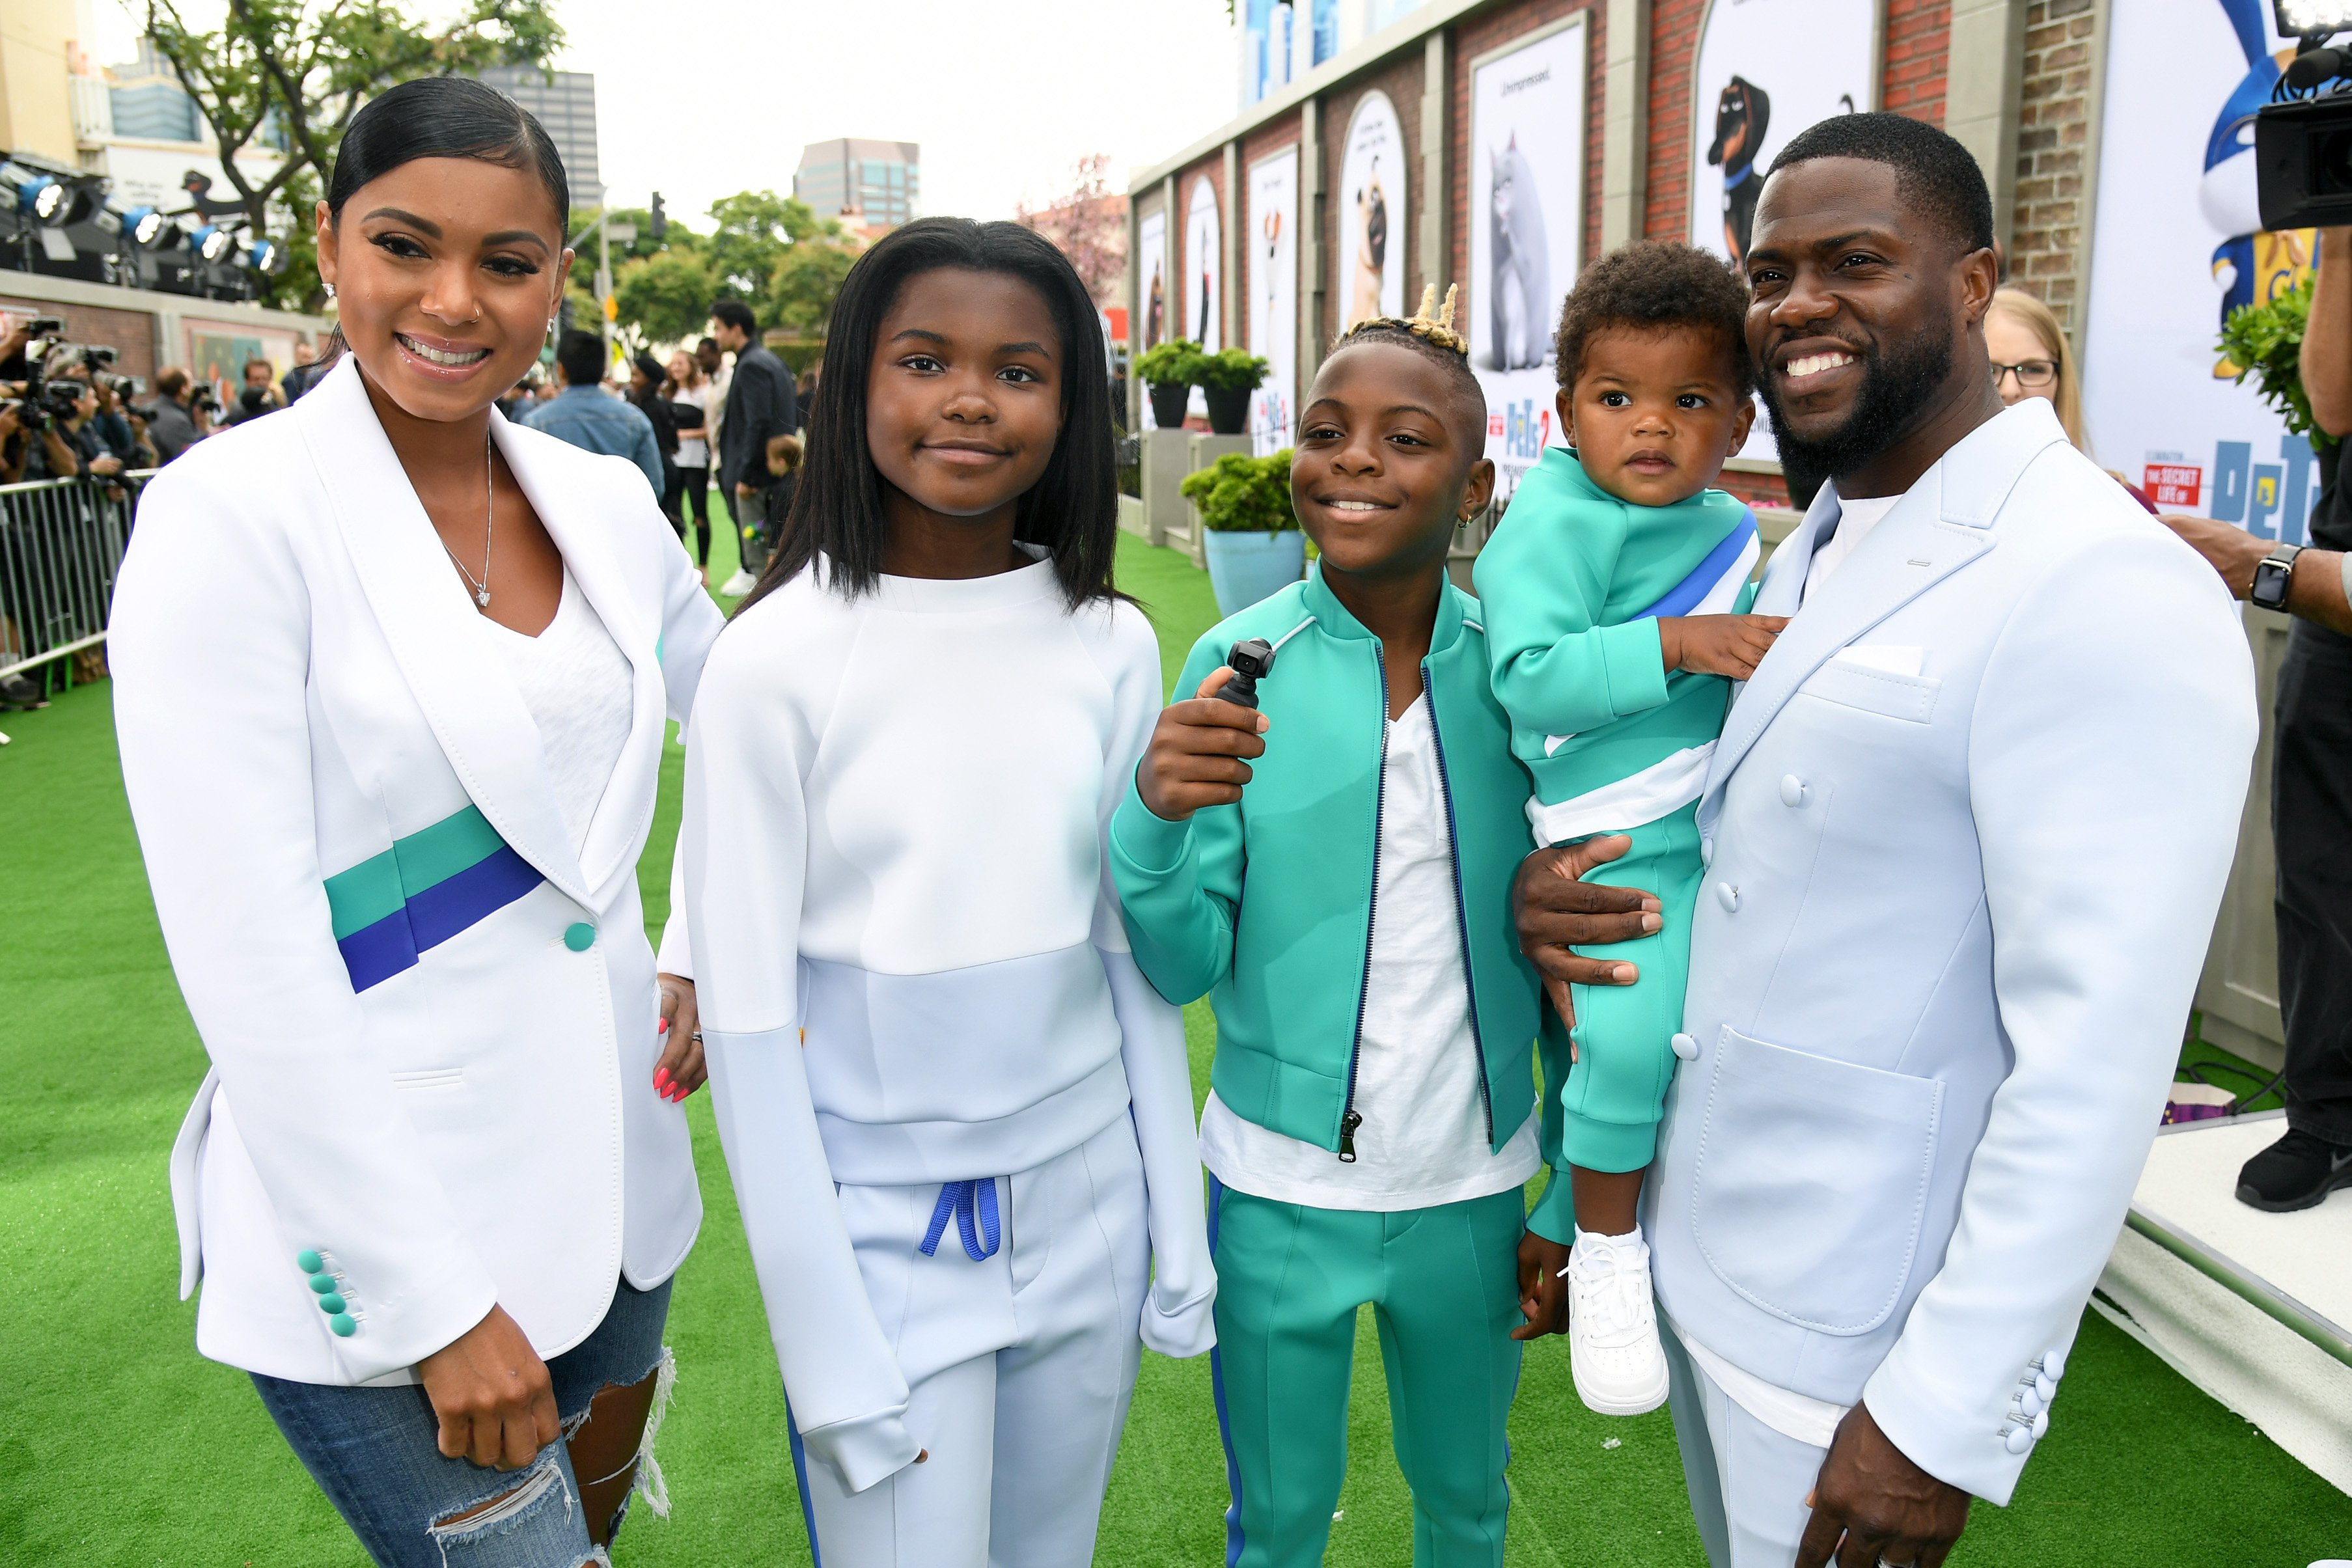 Eniko Parrish, Kevin Hart and their kids at 'The Secret Life of Pets 2' premiere at Regency Village Theatre on June 02, 2019 in Westwood, California. | Source: Getty Images